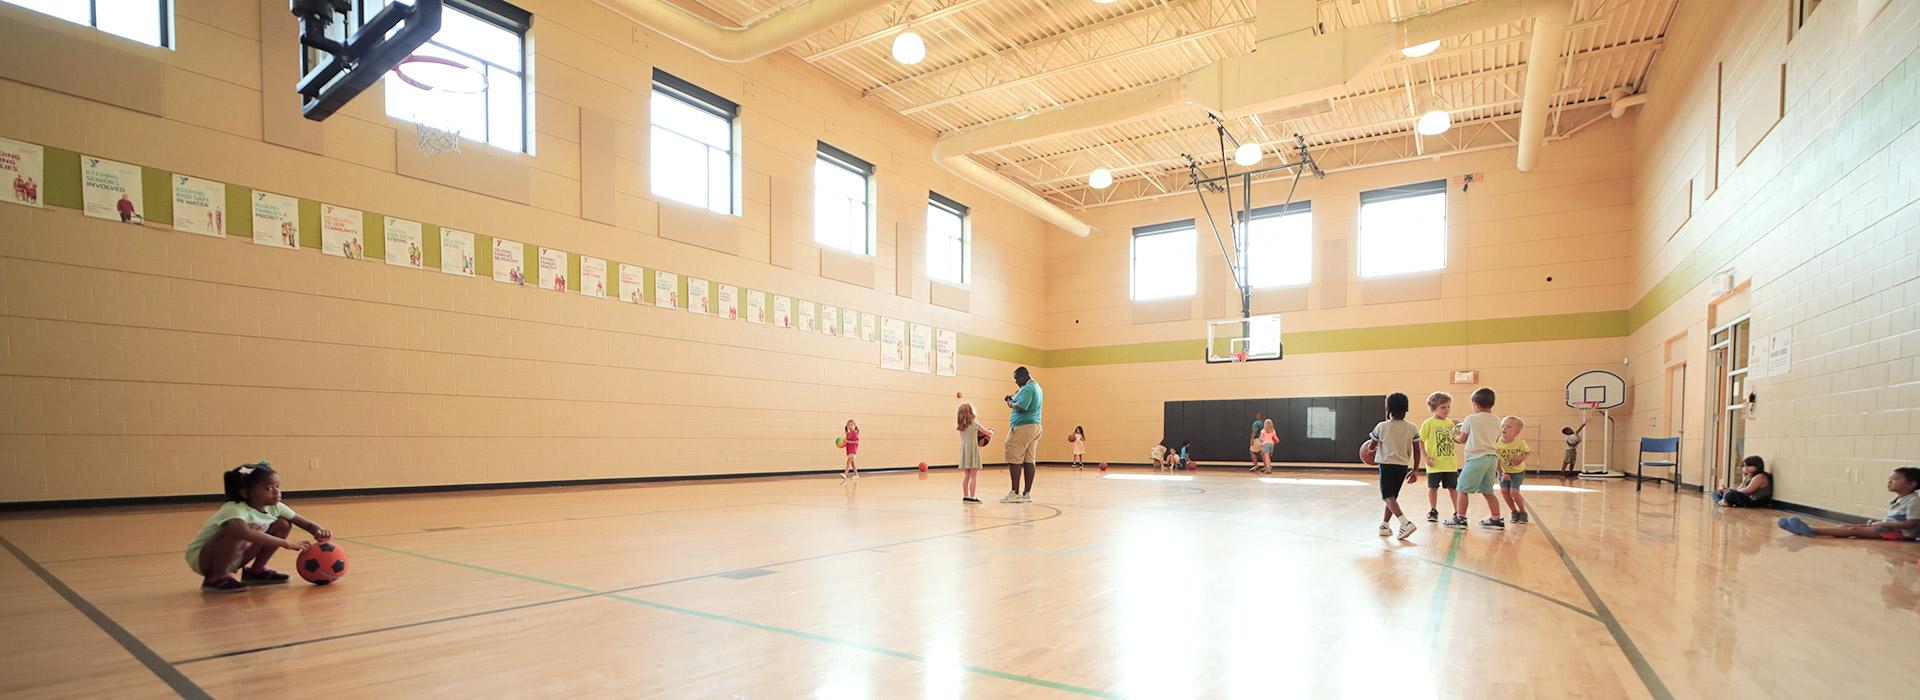 Full-court gymnasium at the YMCA on Granby